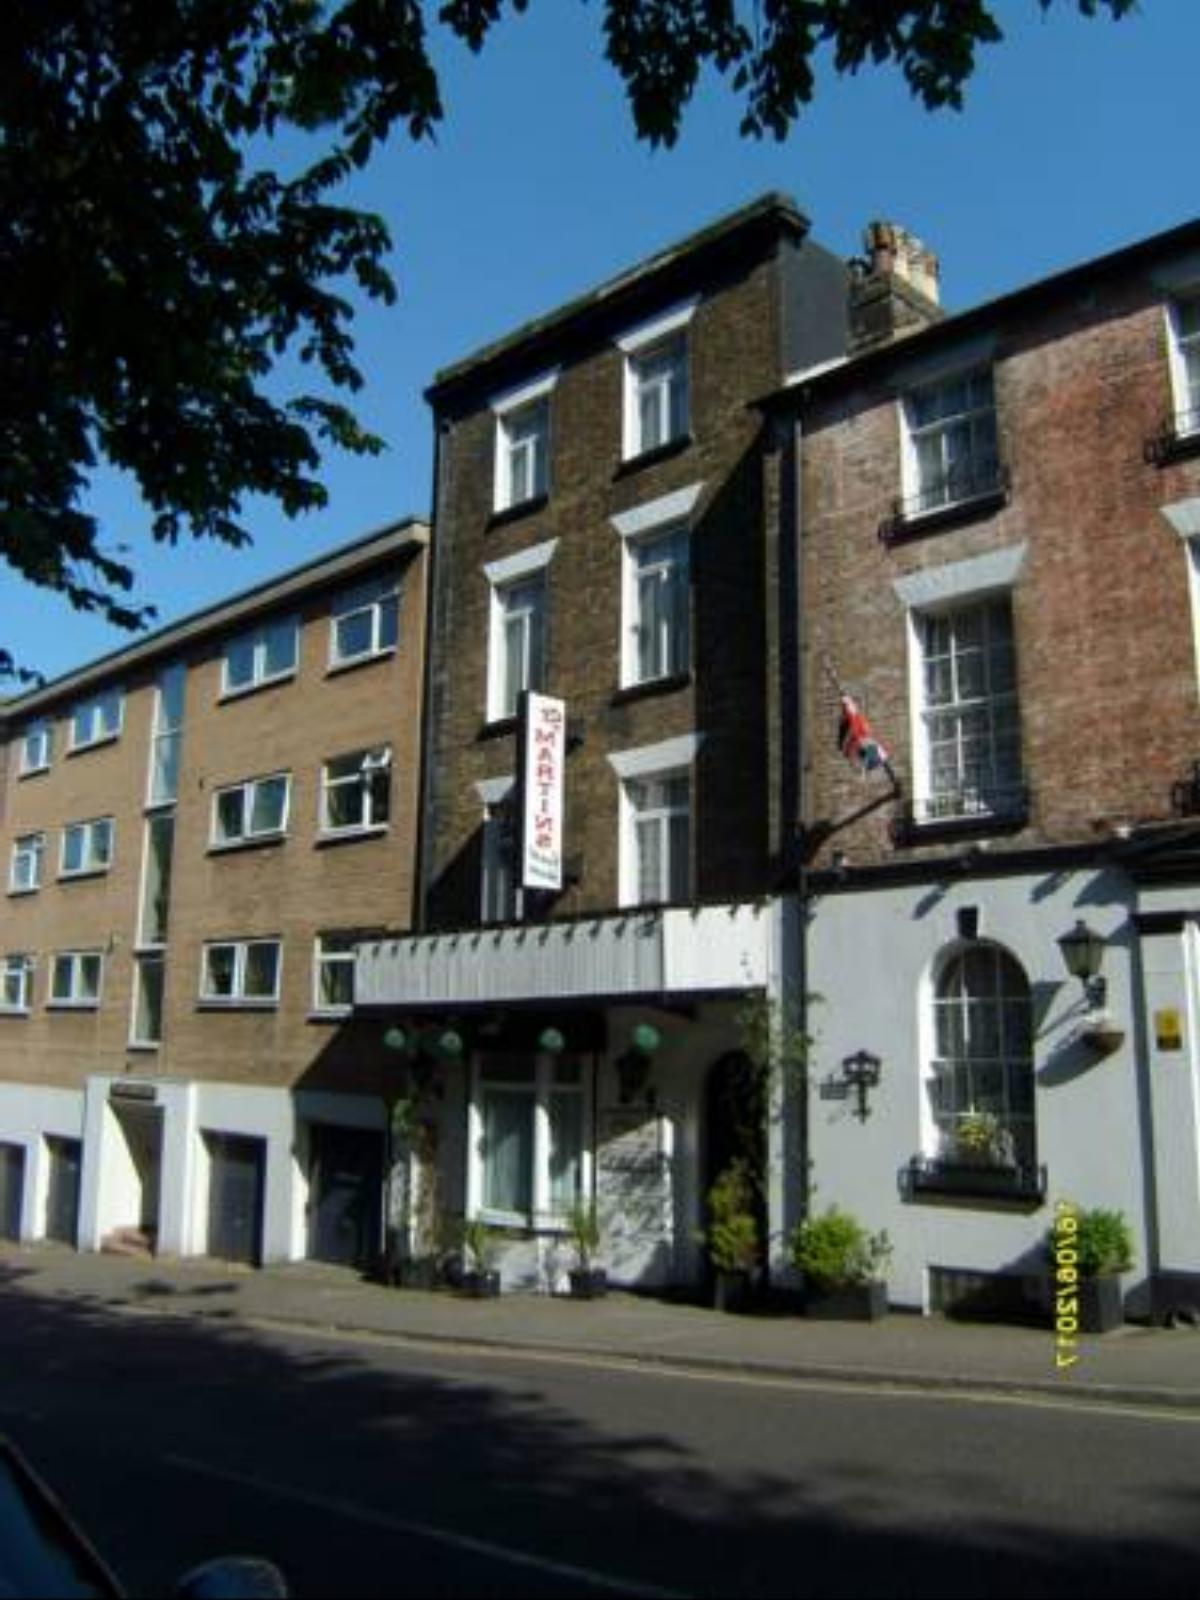 St Martins Guest House Hotel Dover United Kingdom